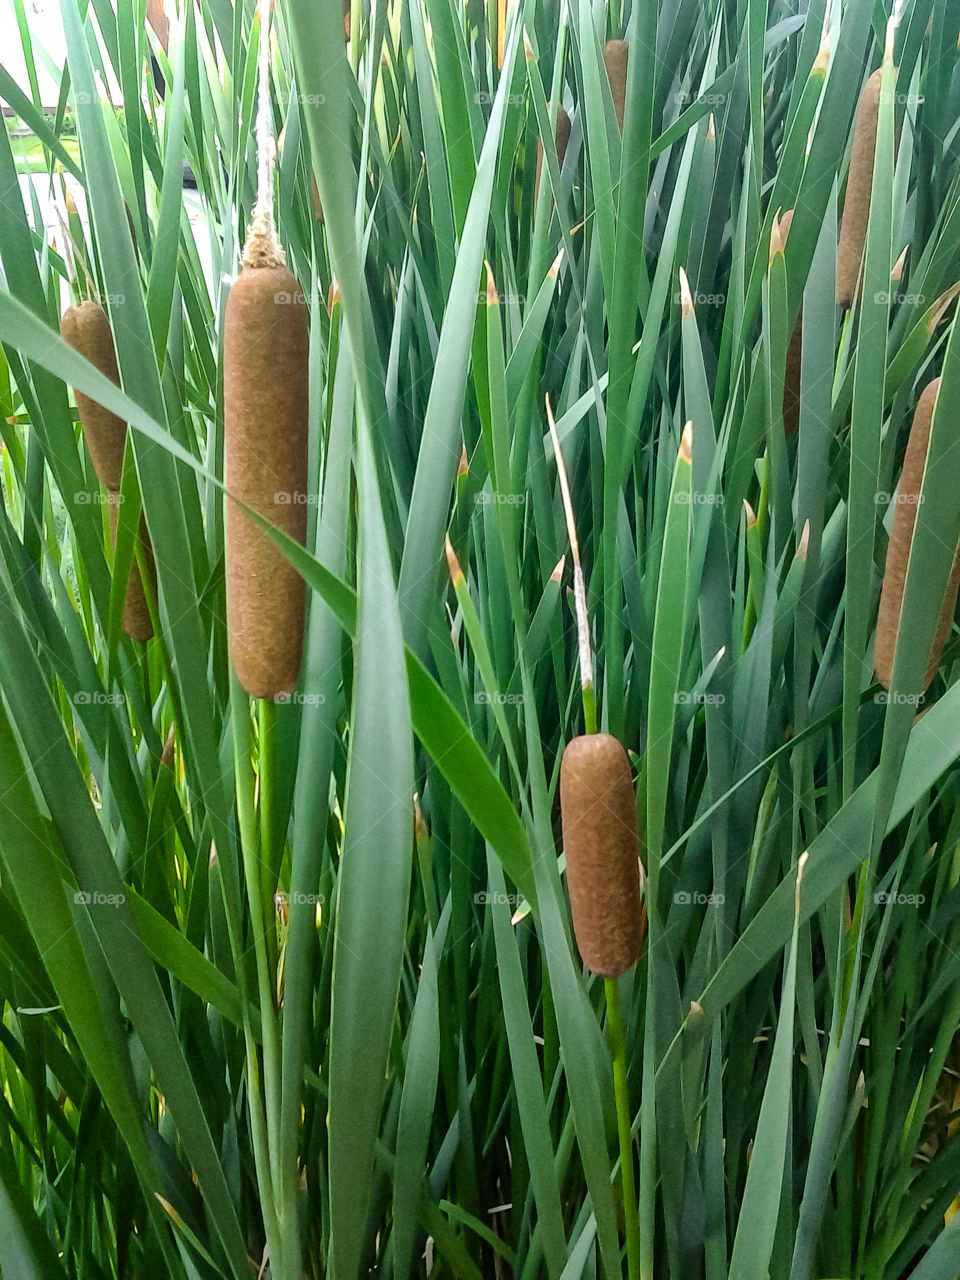 cat tails right?